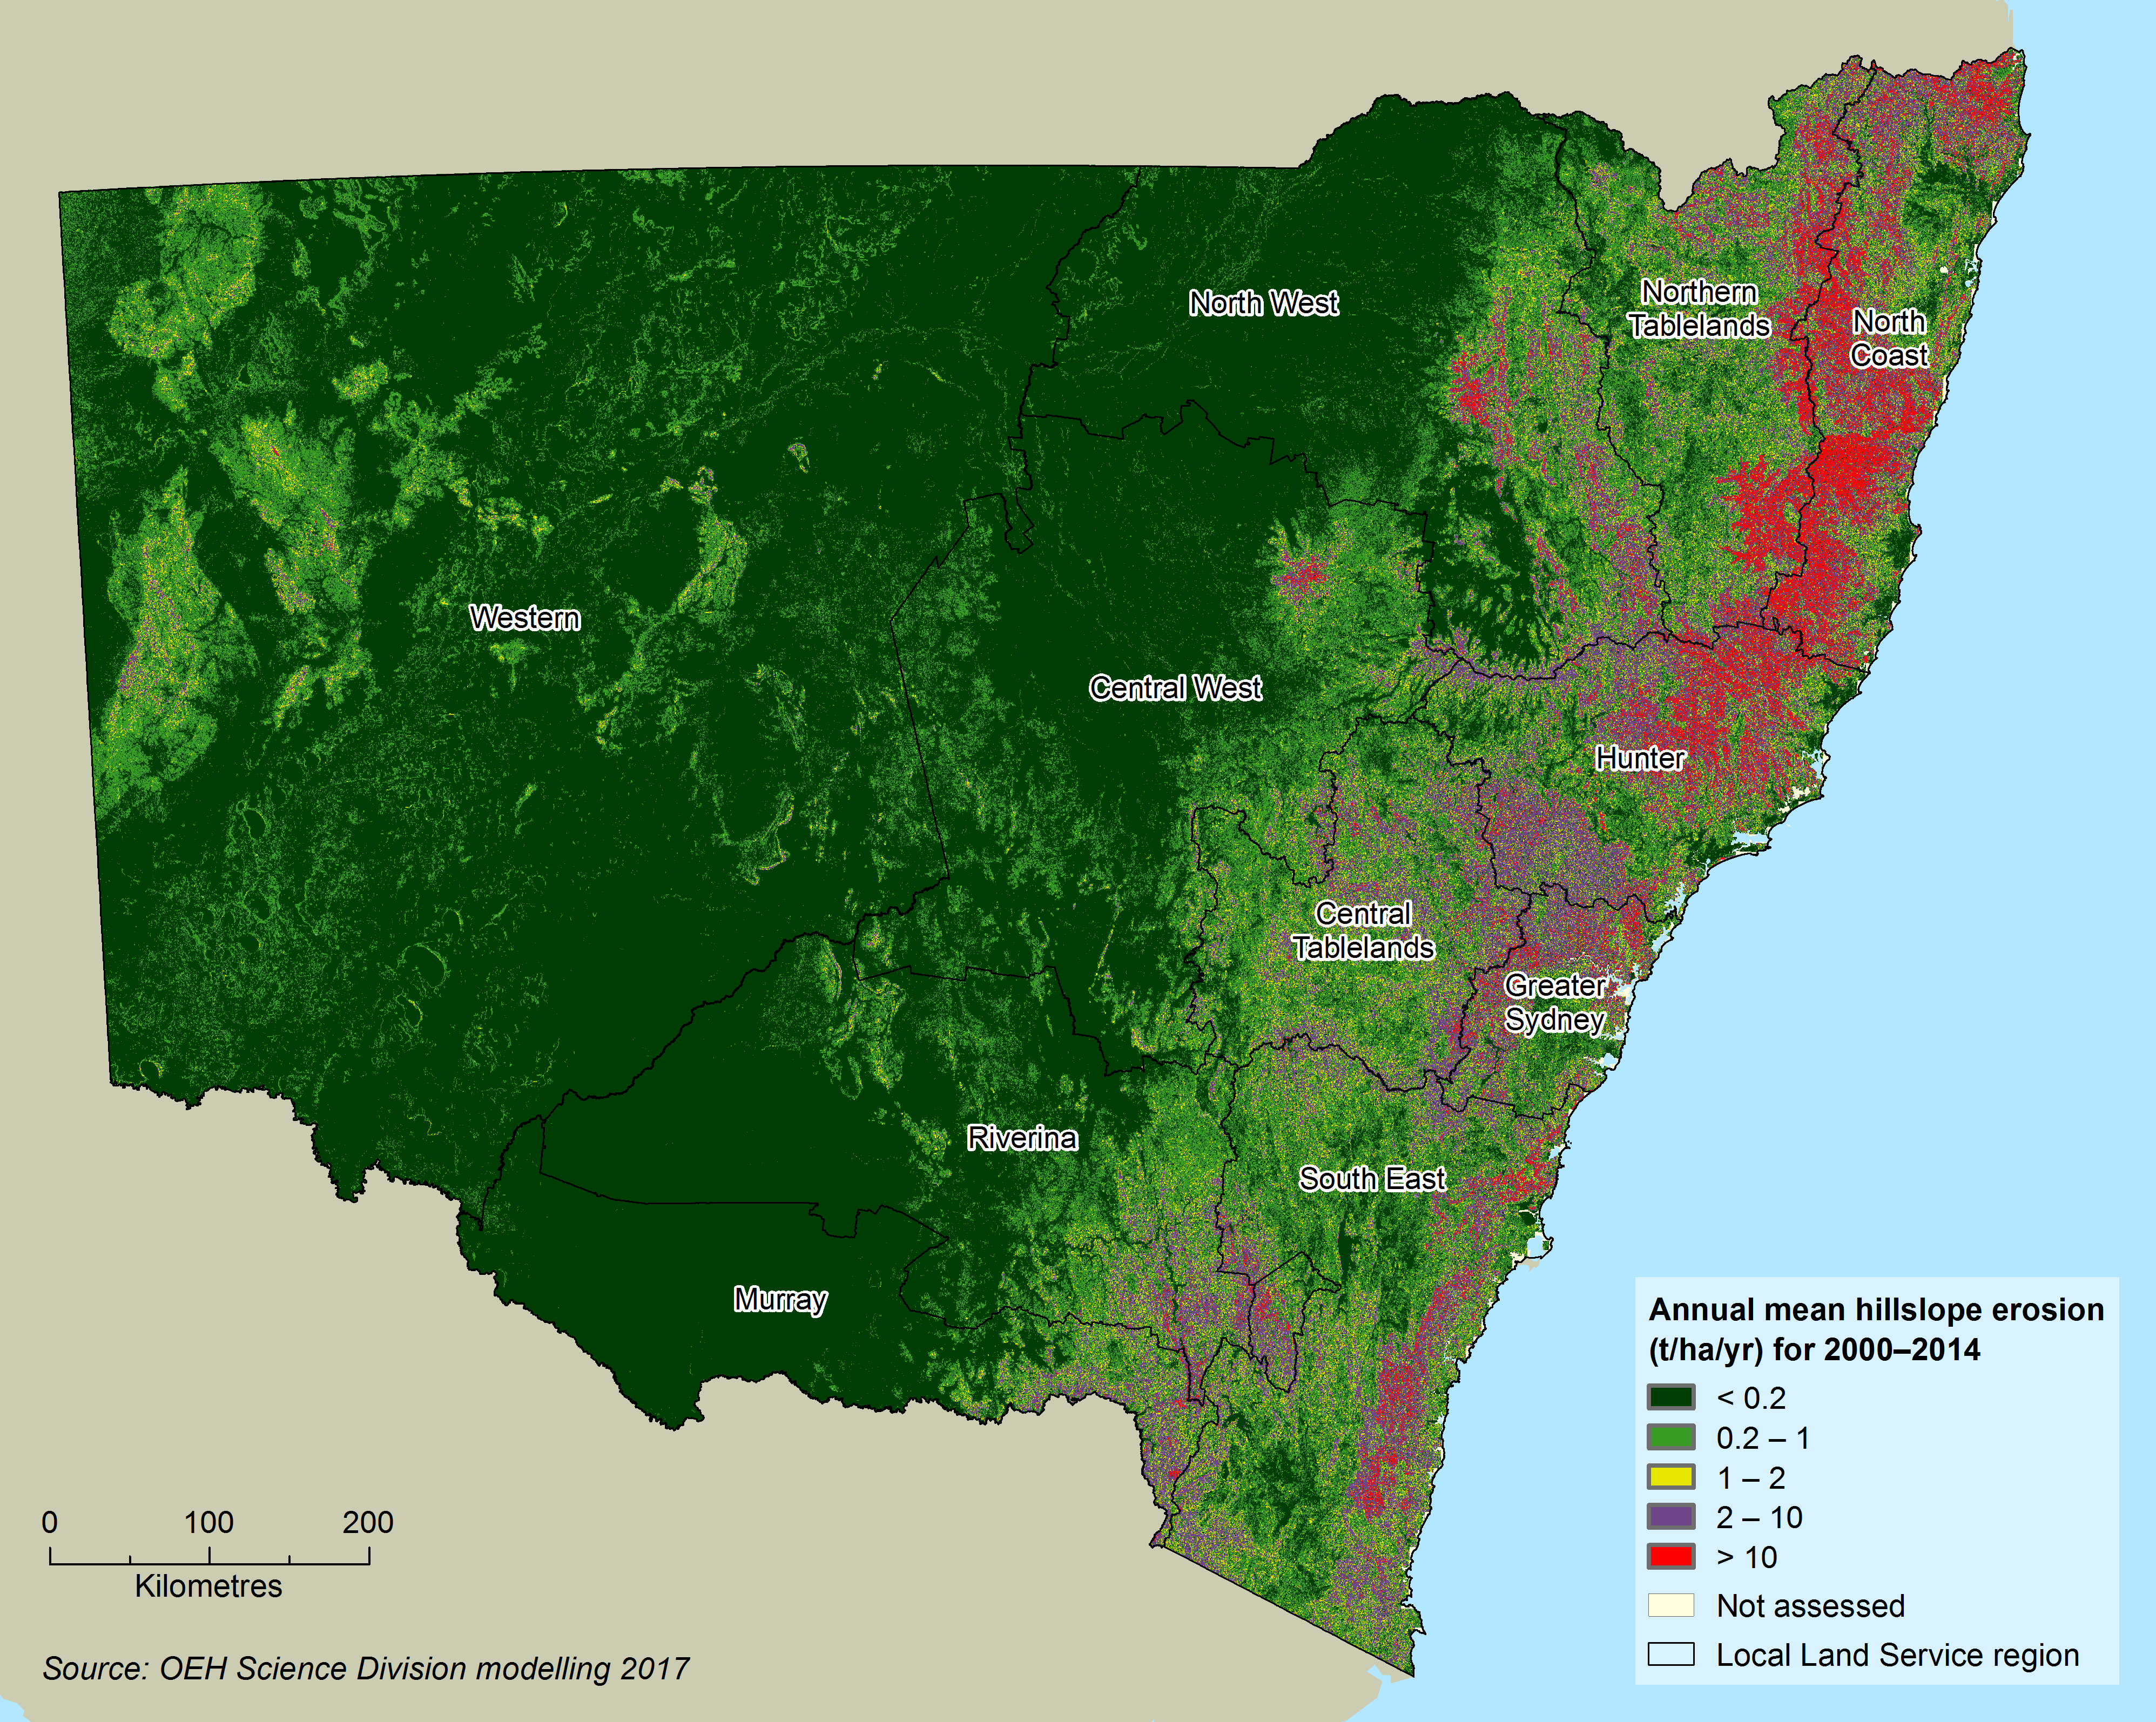 Map of hillslope erosion across NSW, with low levels in the west and high levels on the ranges and north-east coastal regions